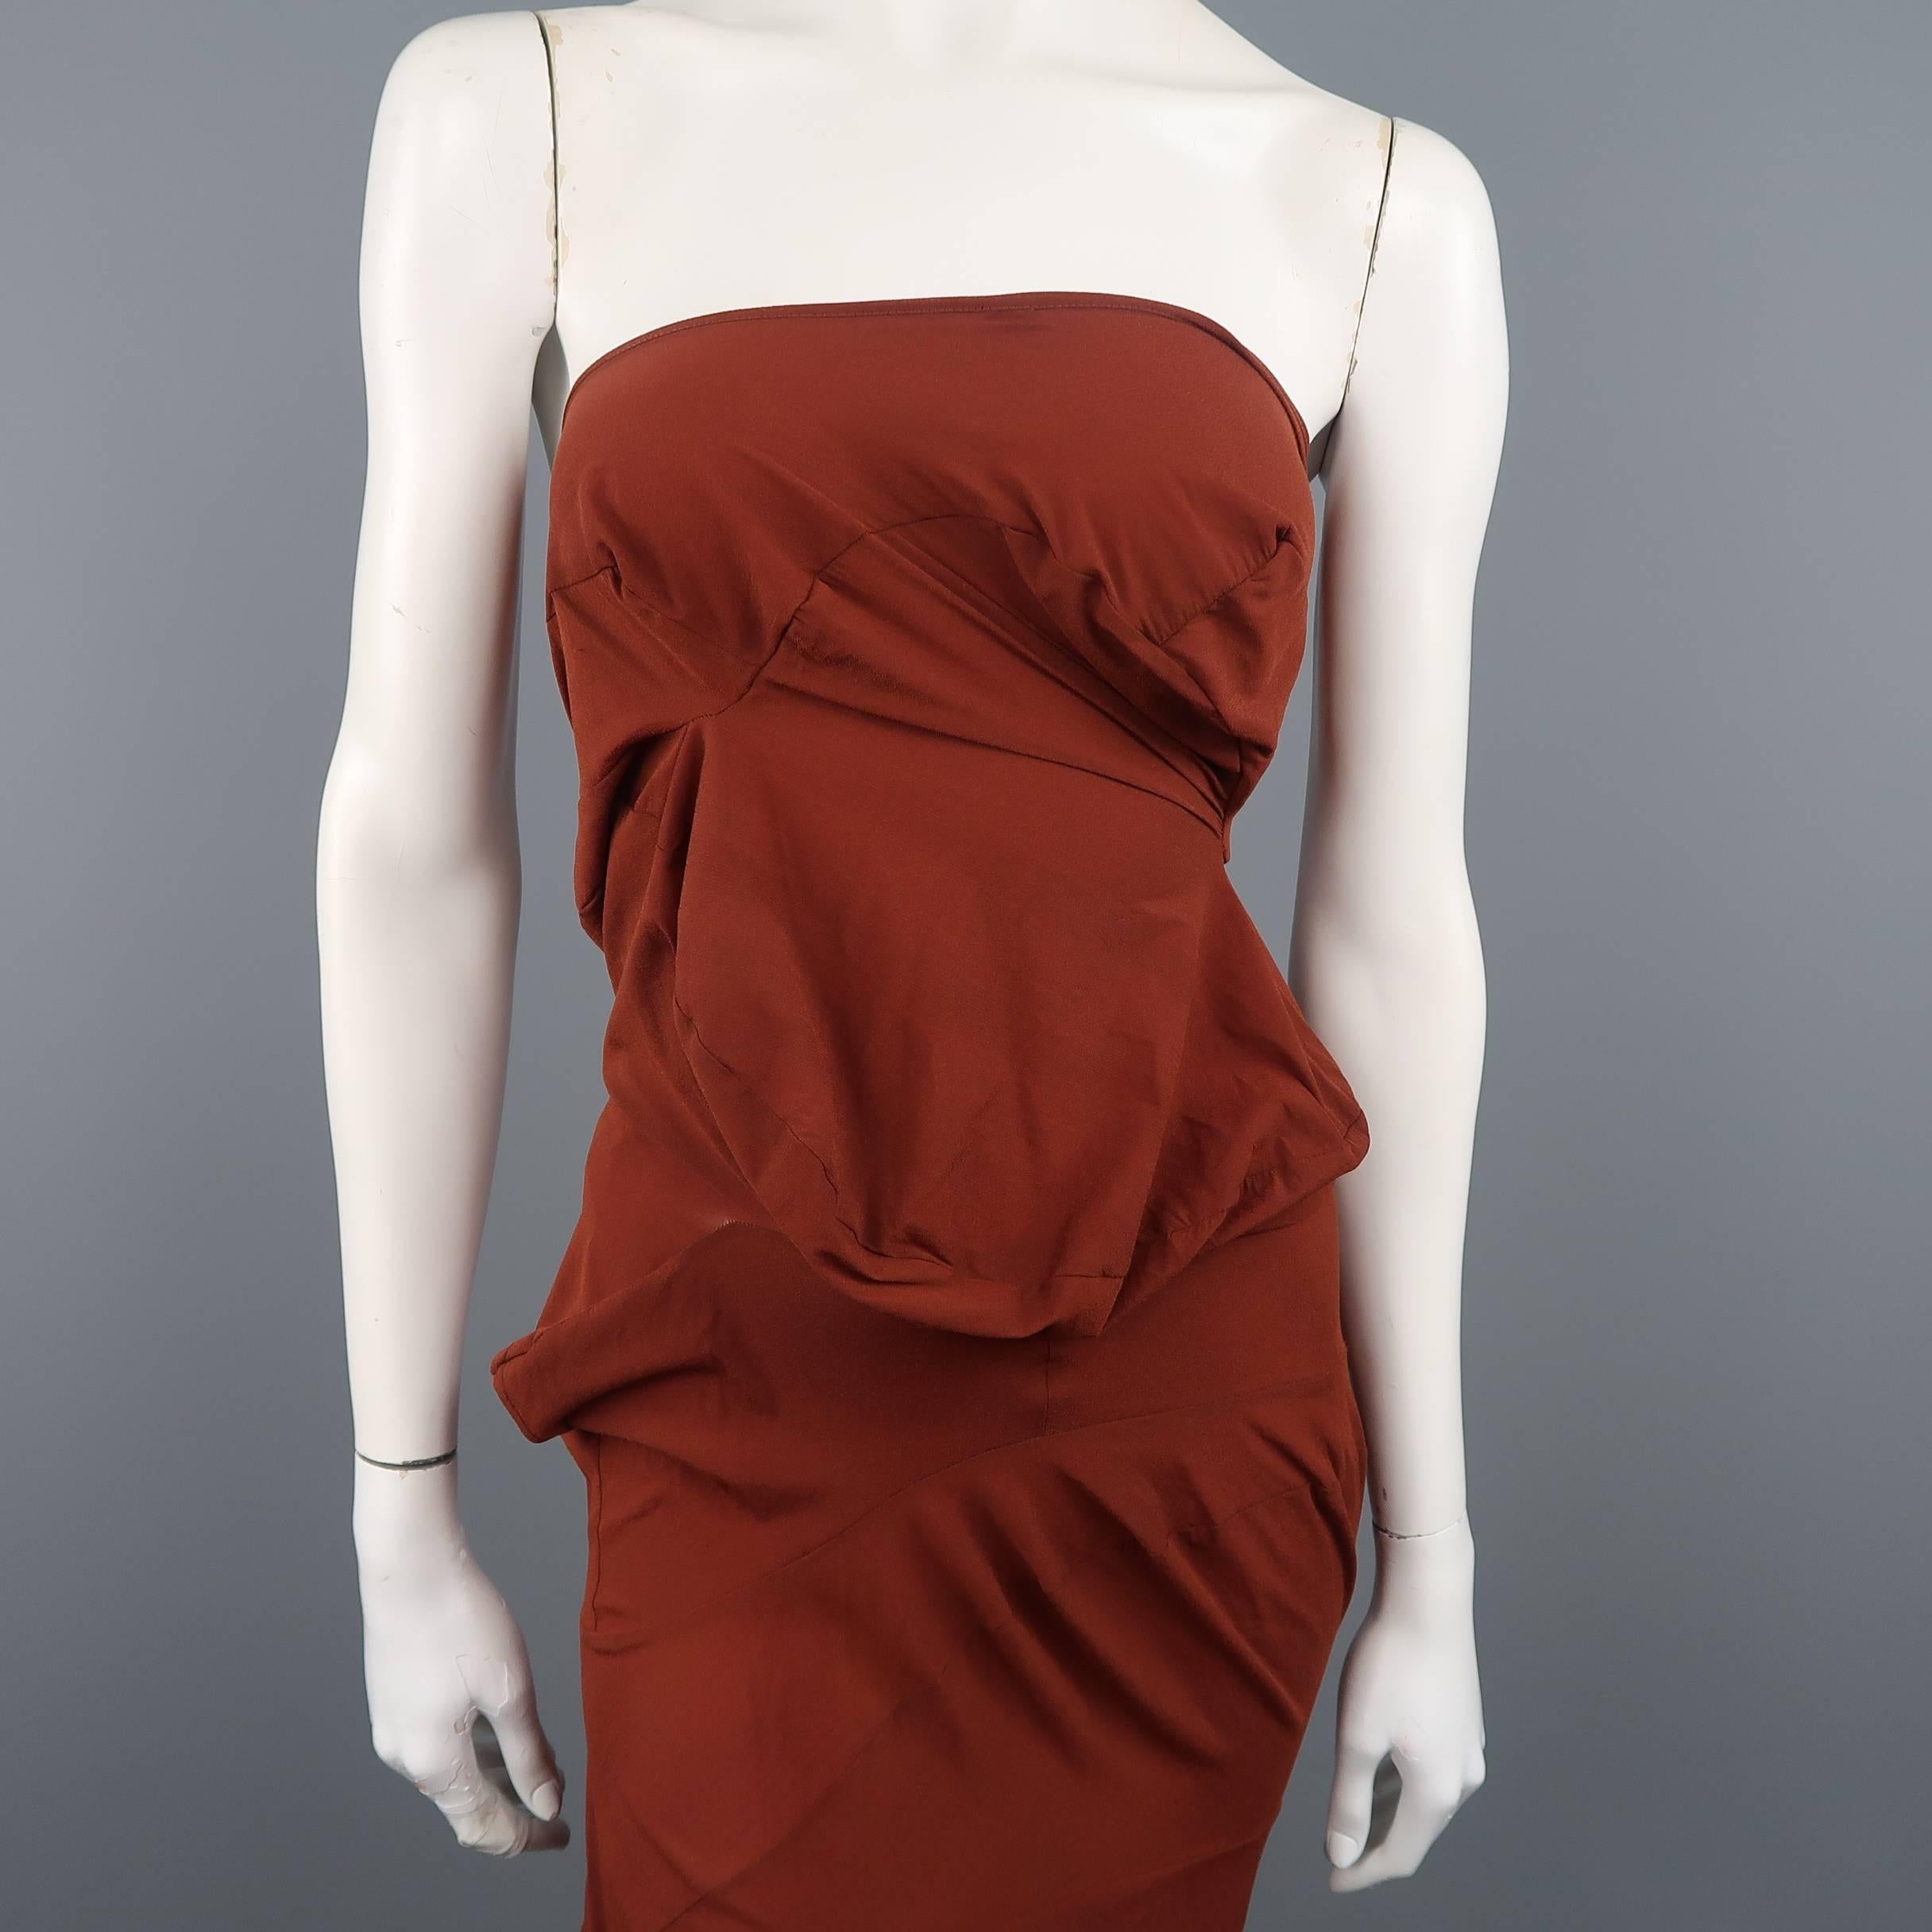 Vintage COMME des GARCONS strapless tube dress comes in a rust brown ultra light weight stretch crepe and features all over avant garde patchwork pattern lump silhouette construction. Minor wear. Tags cut. As-is.
 
Fair Pre-Owned Condition.
Marked: